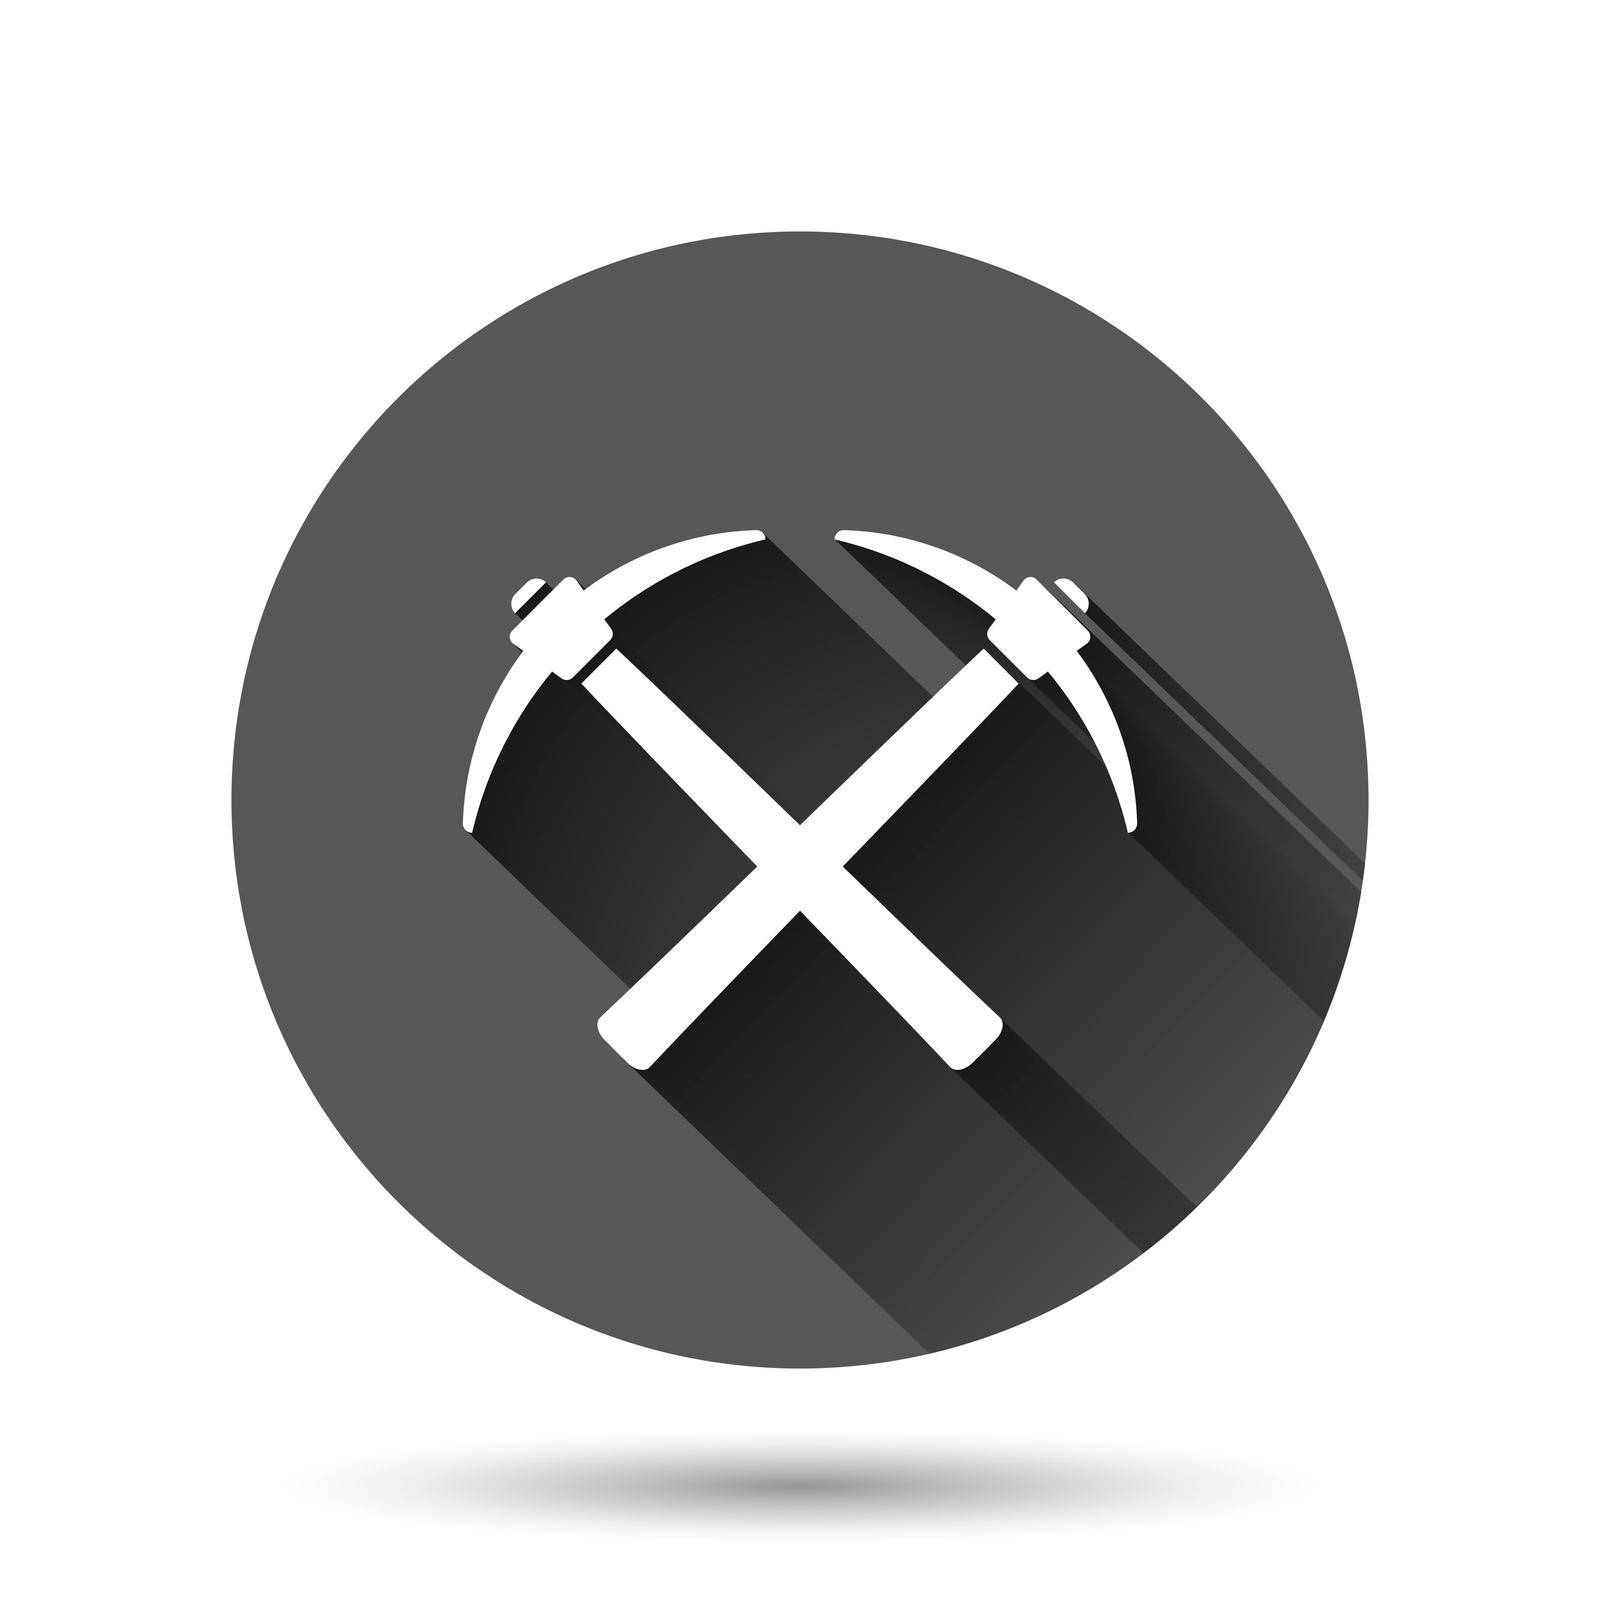 Axe icon in flat style. Lumberjack vector illustration on black round background with long shadow effect. Blade circle button business concept.